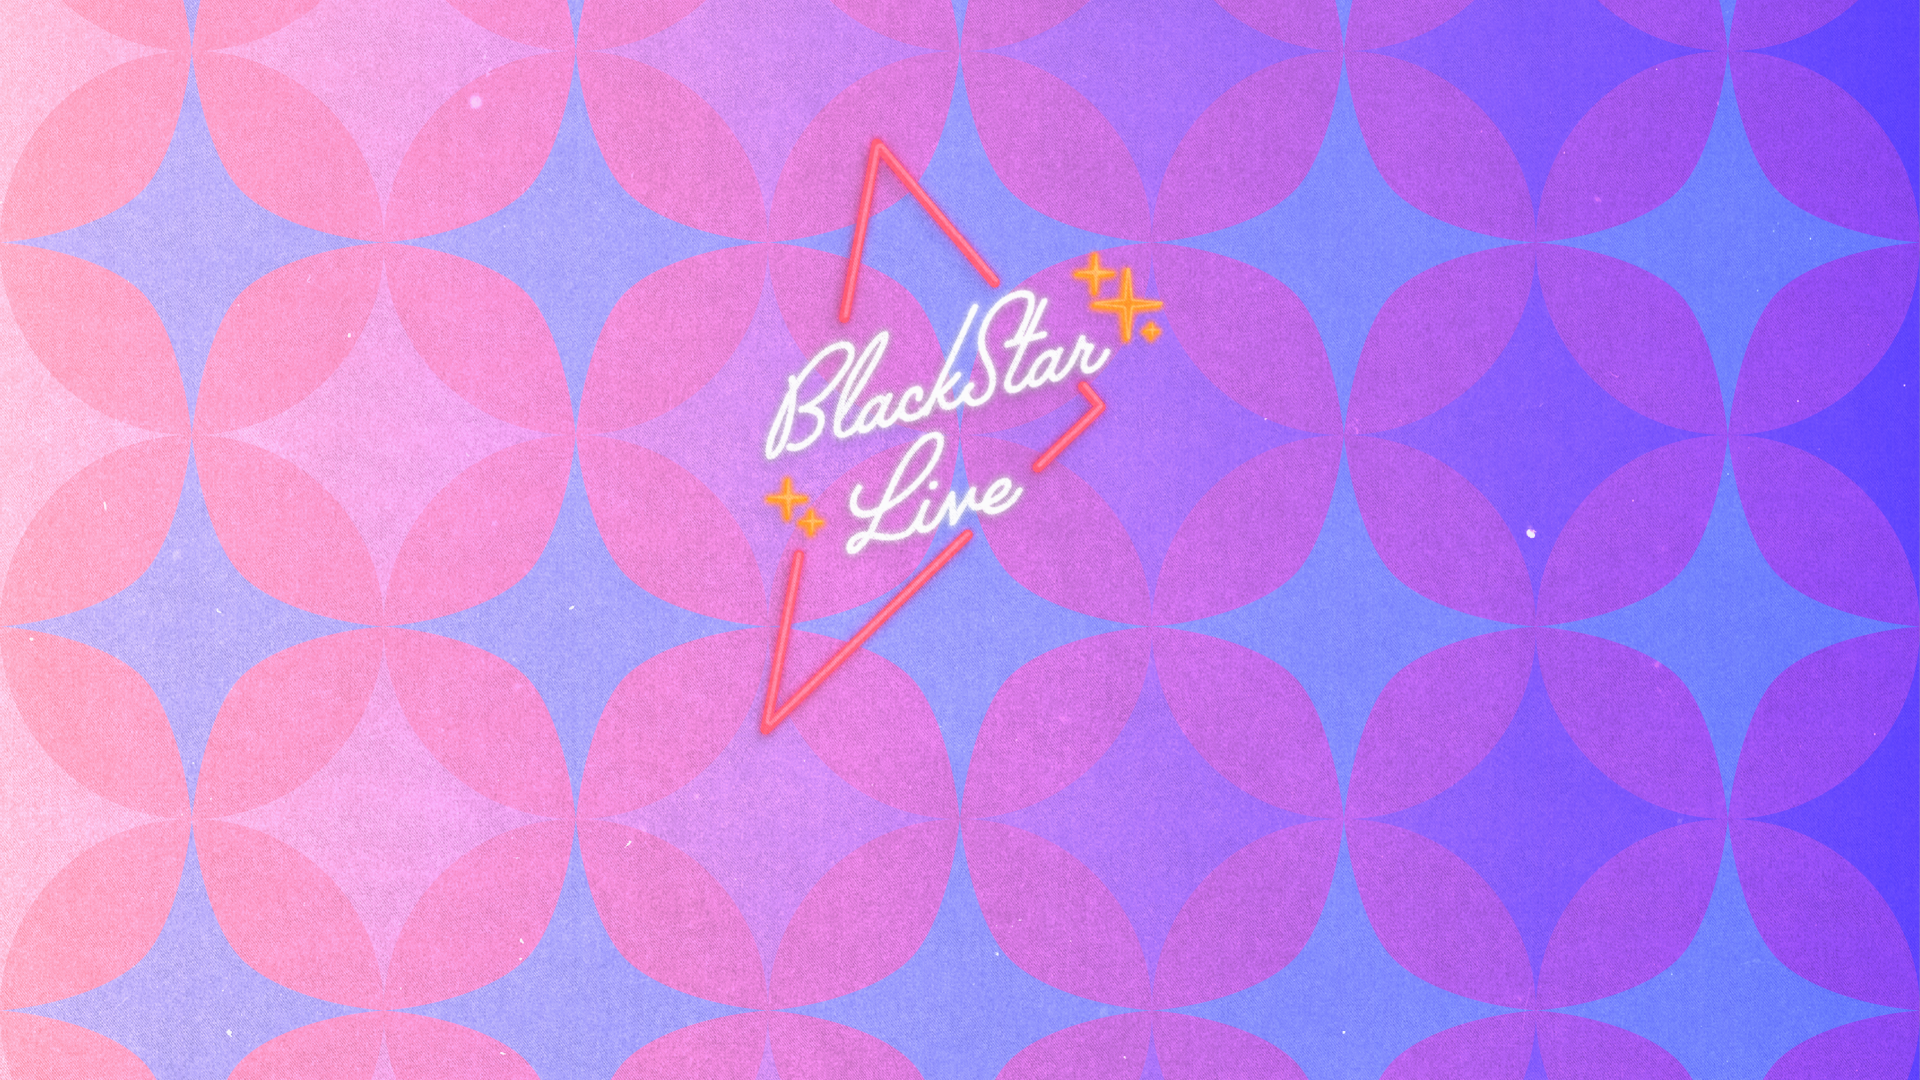 BlackStar Live logo (a retro 70s vibe, sparkling stars around it, neon lights feels). Purple, blue, and pink colors.